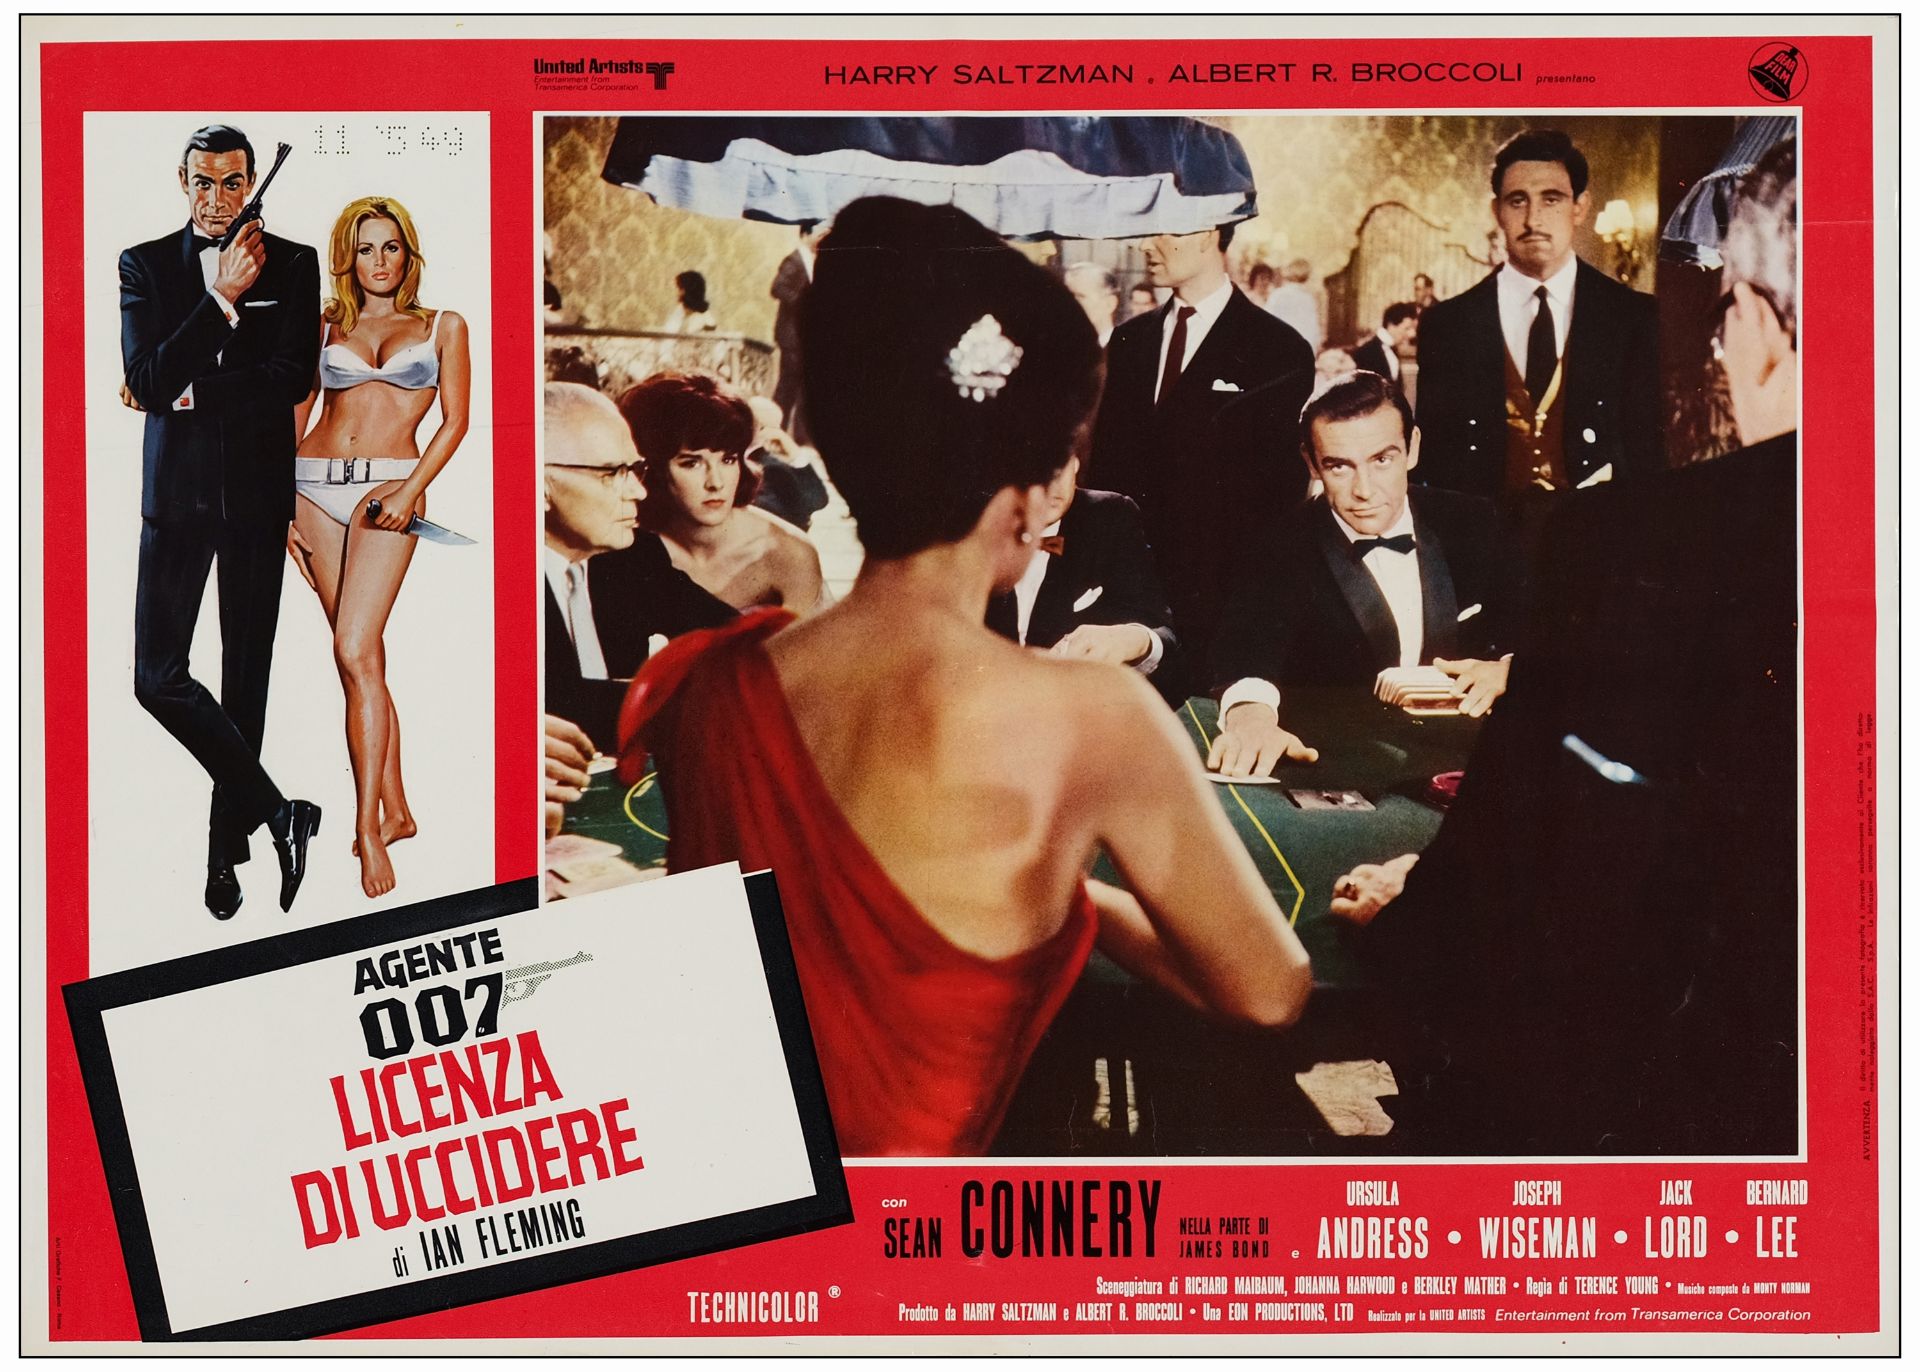 JAMES BOND: DR. NO/FROM RUSSIA WITH LOVE - Italian Photobusta Sets (2) of (6) (18" x 26.25"); Fine+ - Image 12 of 19